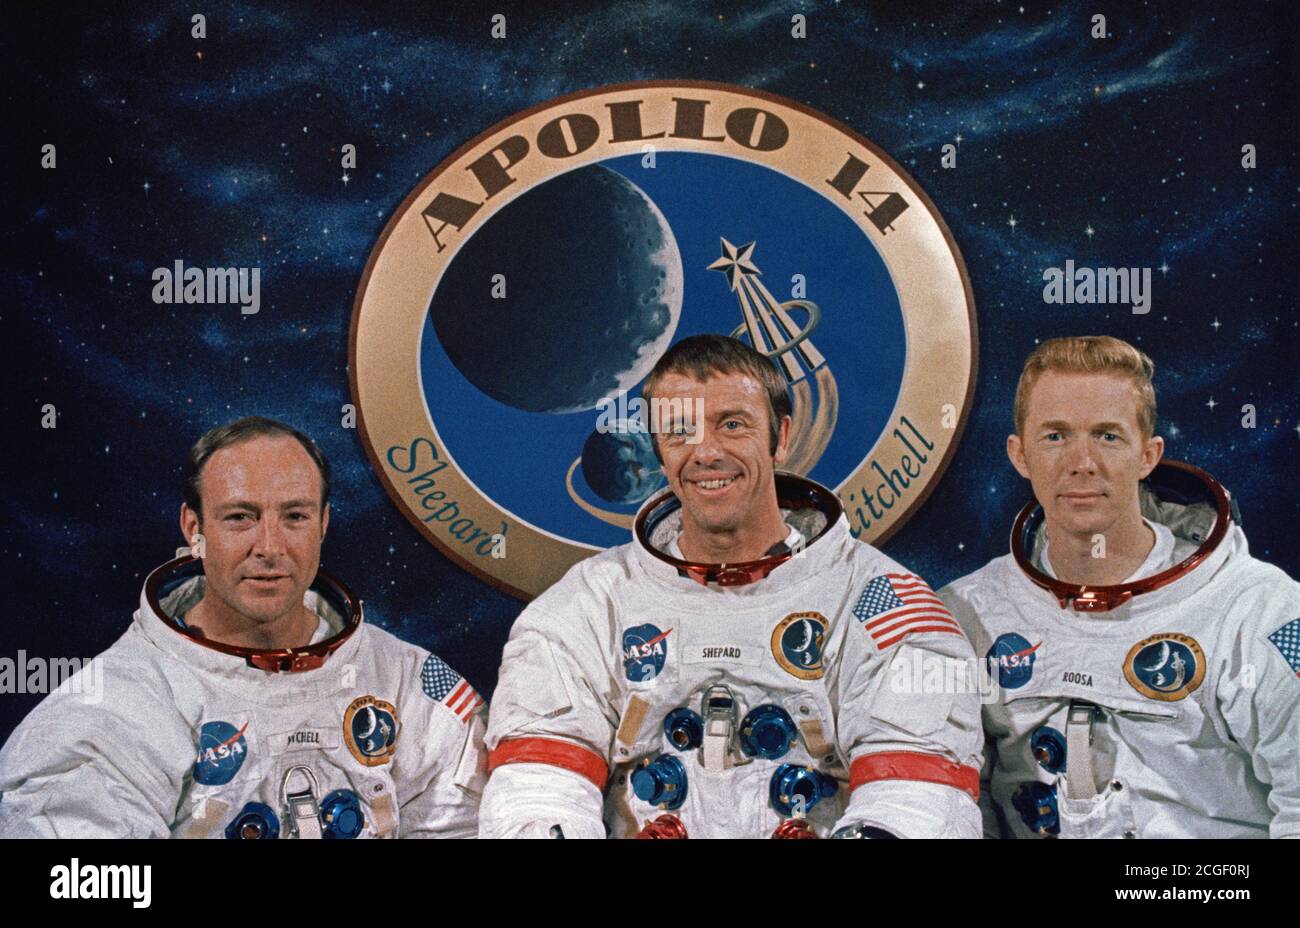 (December 1970) --- These three astronauts are the prime crew of the Apollo 14 lunar landing mission. Left to right, are Edgar D. Mitchell, lunar module pilot; Alan B. Shepard Jr., commander; and Stuart A. Roosa, command module pilot. The Apollo 14 emblem is in the background. Stock Photo